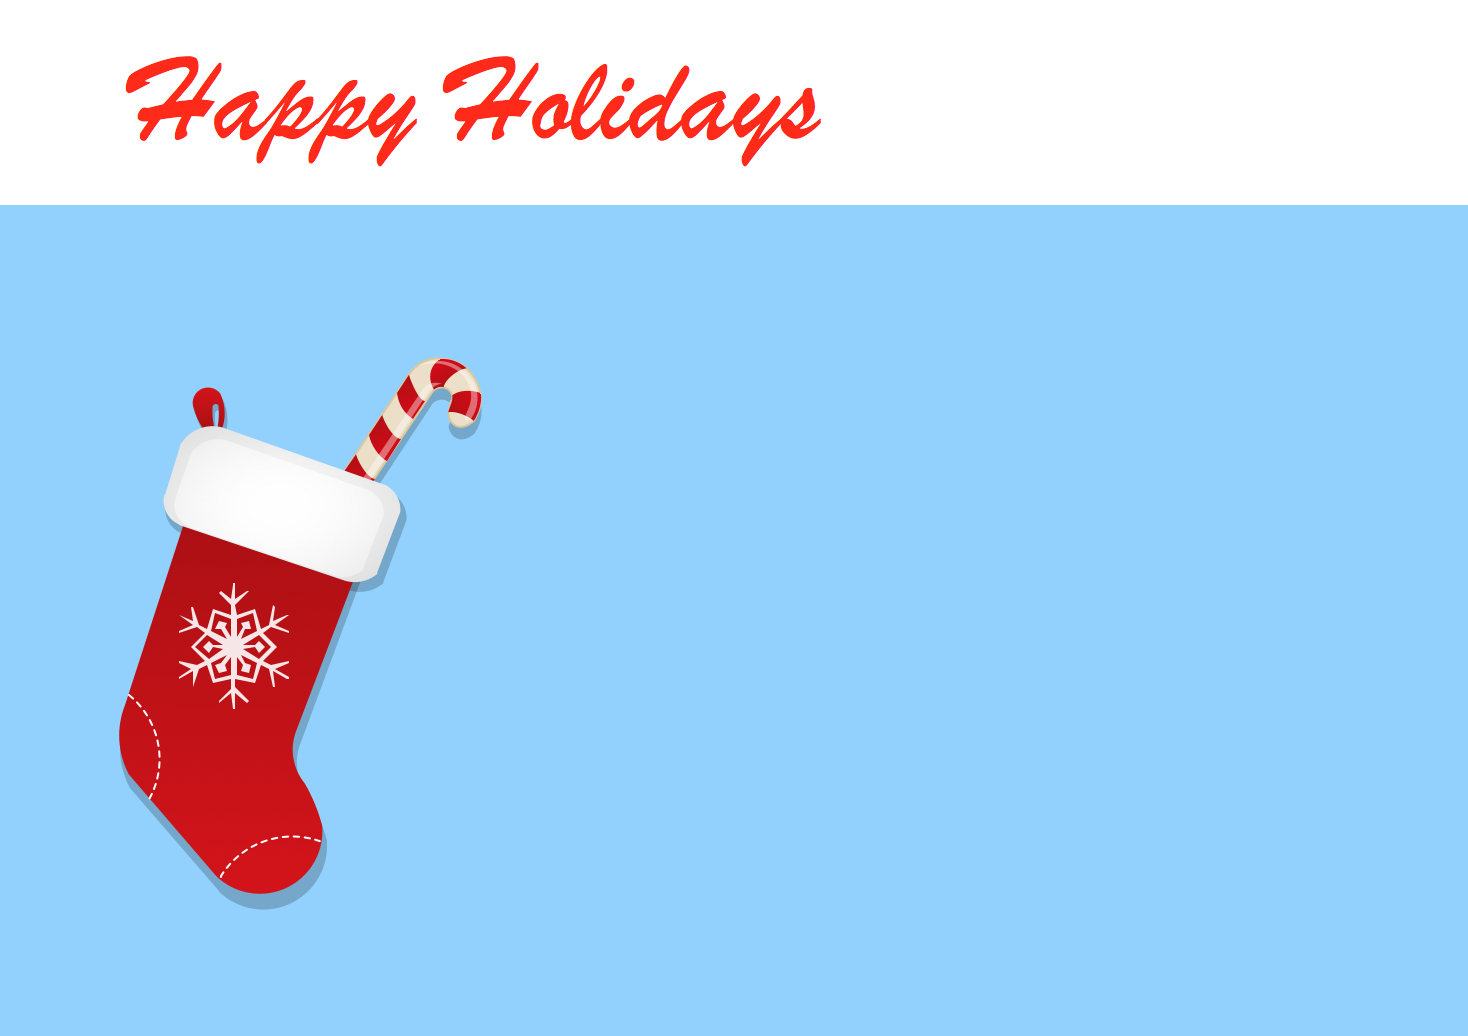 11 Happy Holiday Card Templates Images – Happy Holiday For Happy Holidays Card Template